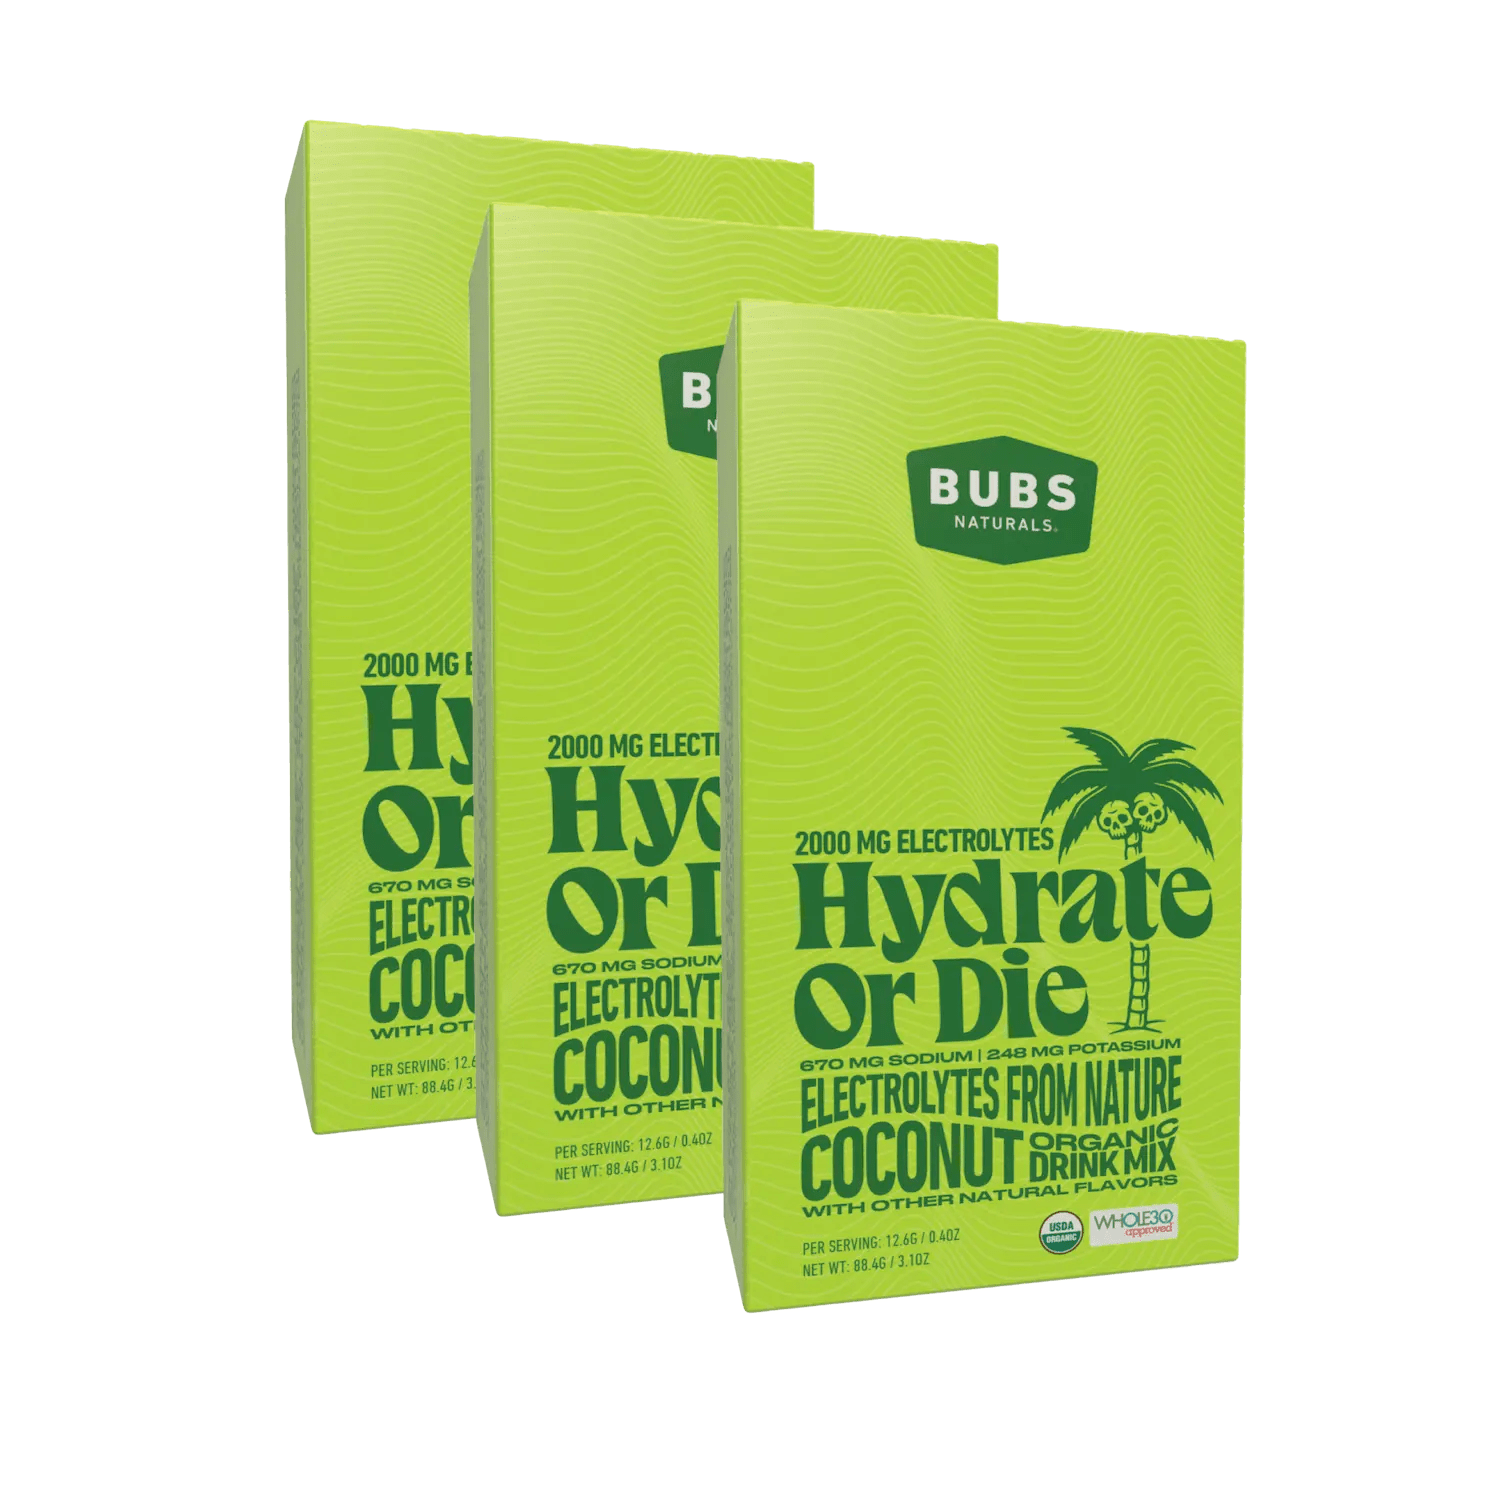 BUBS Naturals Hydrate or Die Electrolyte Cartons, coconut, bundle of 3